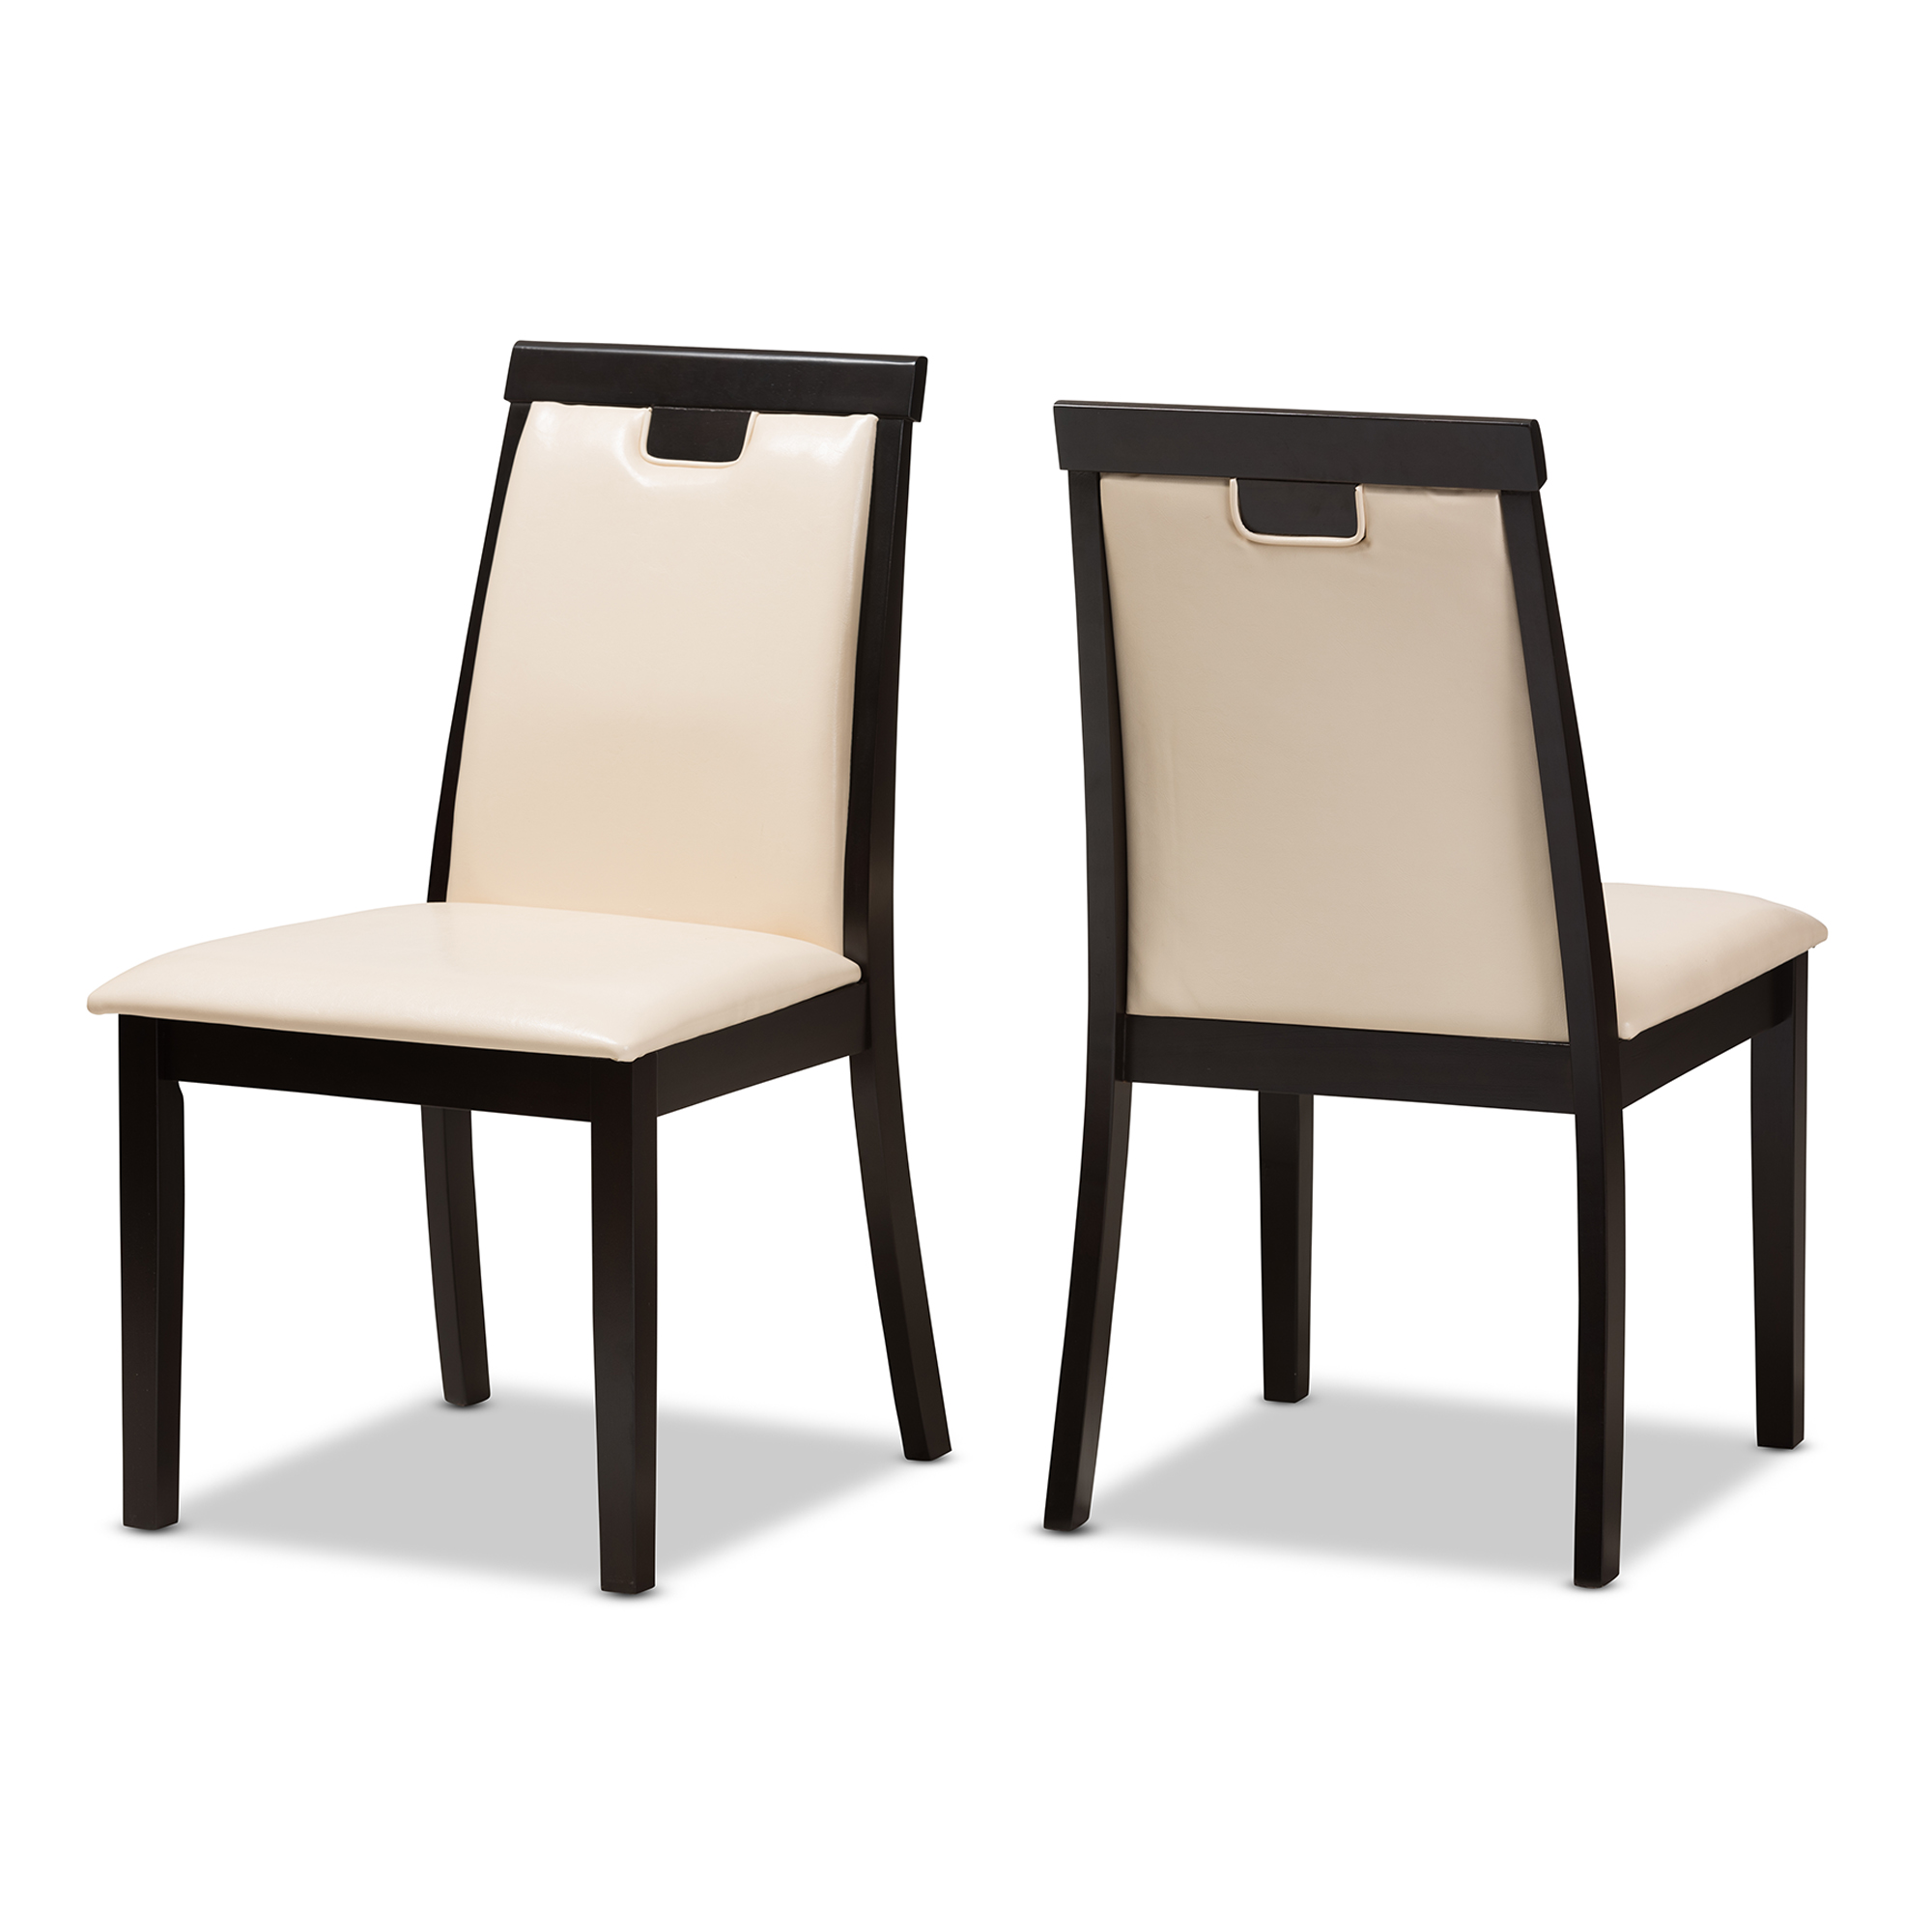 Baxton Studio Evelyn Modern and Contemporary Beige Faux Leather Upholstered and Dark Brown Finished Dining Chair Set of 2